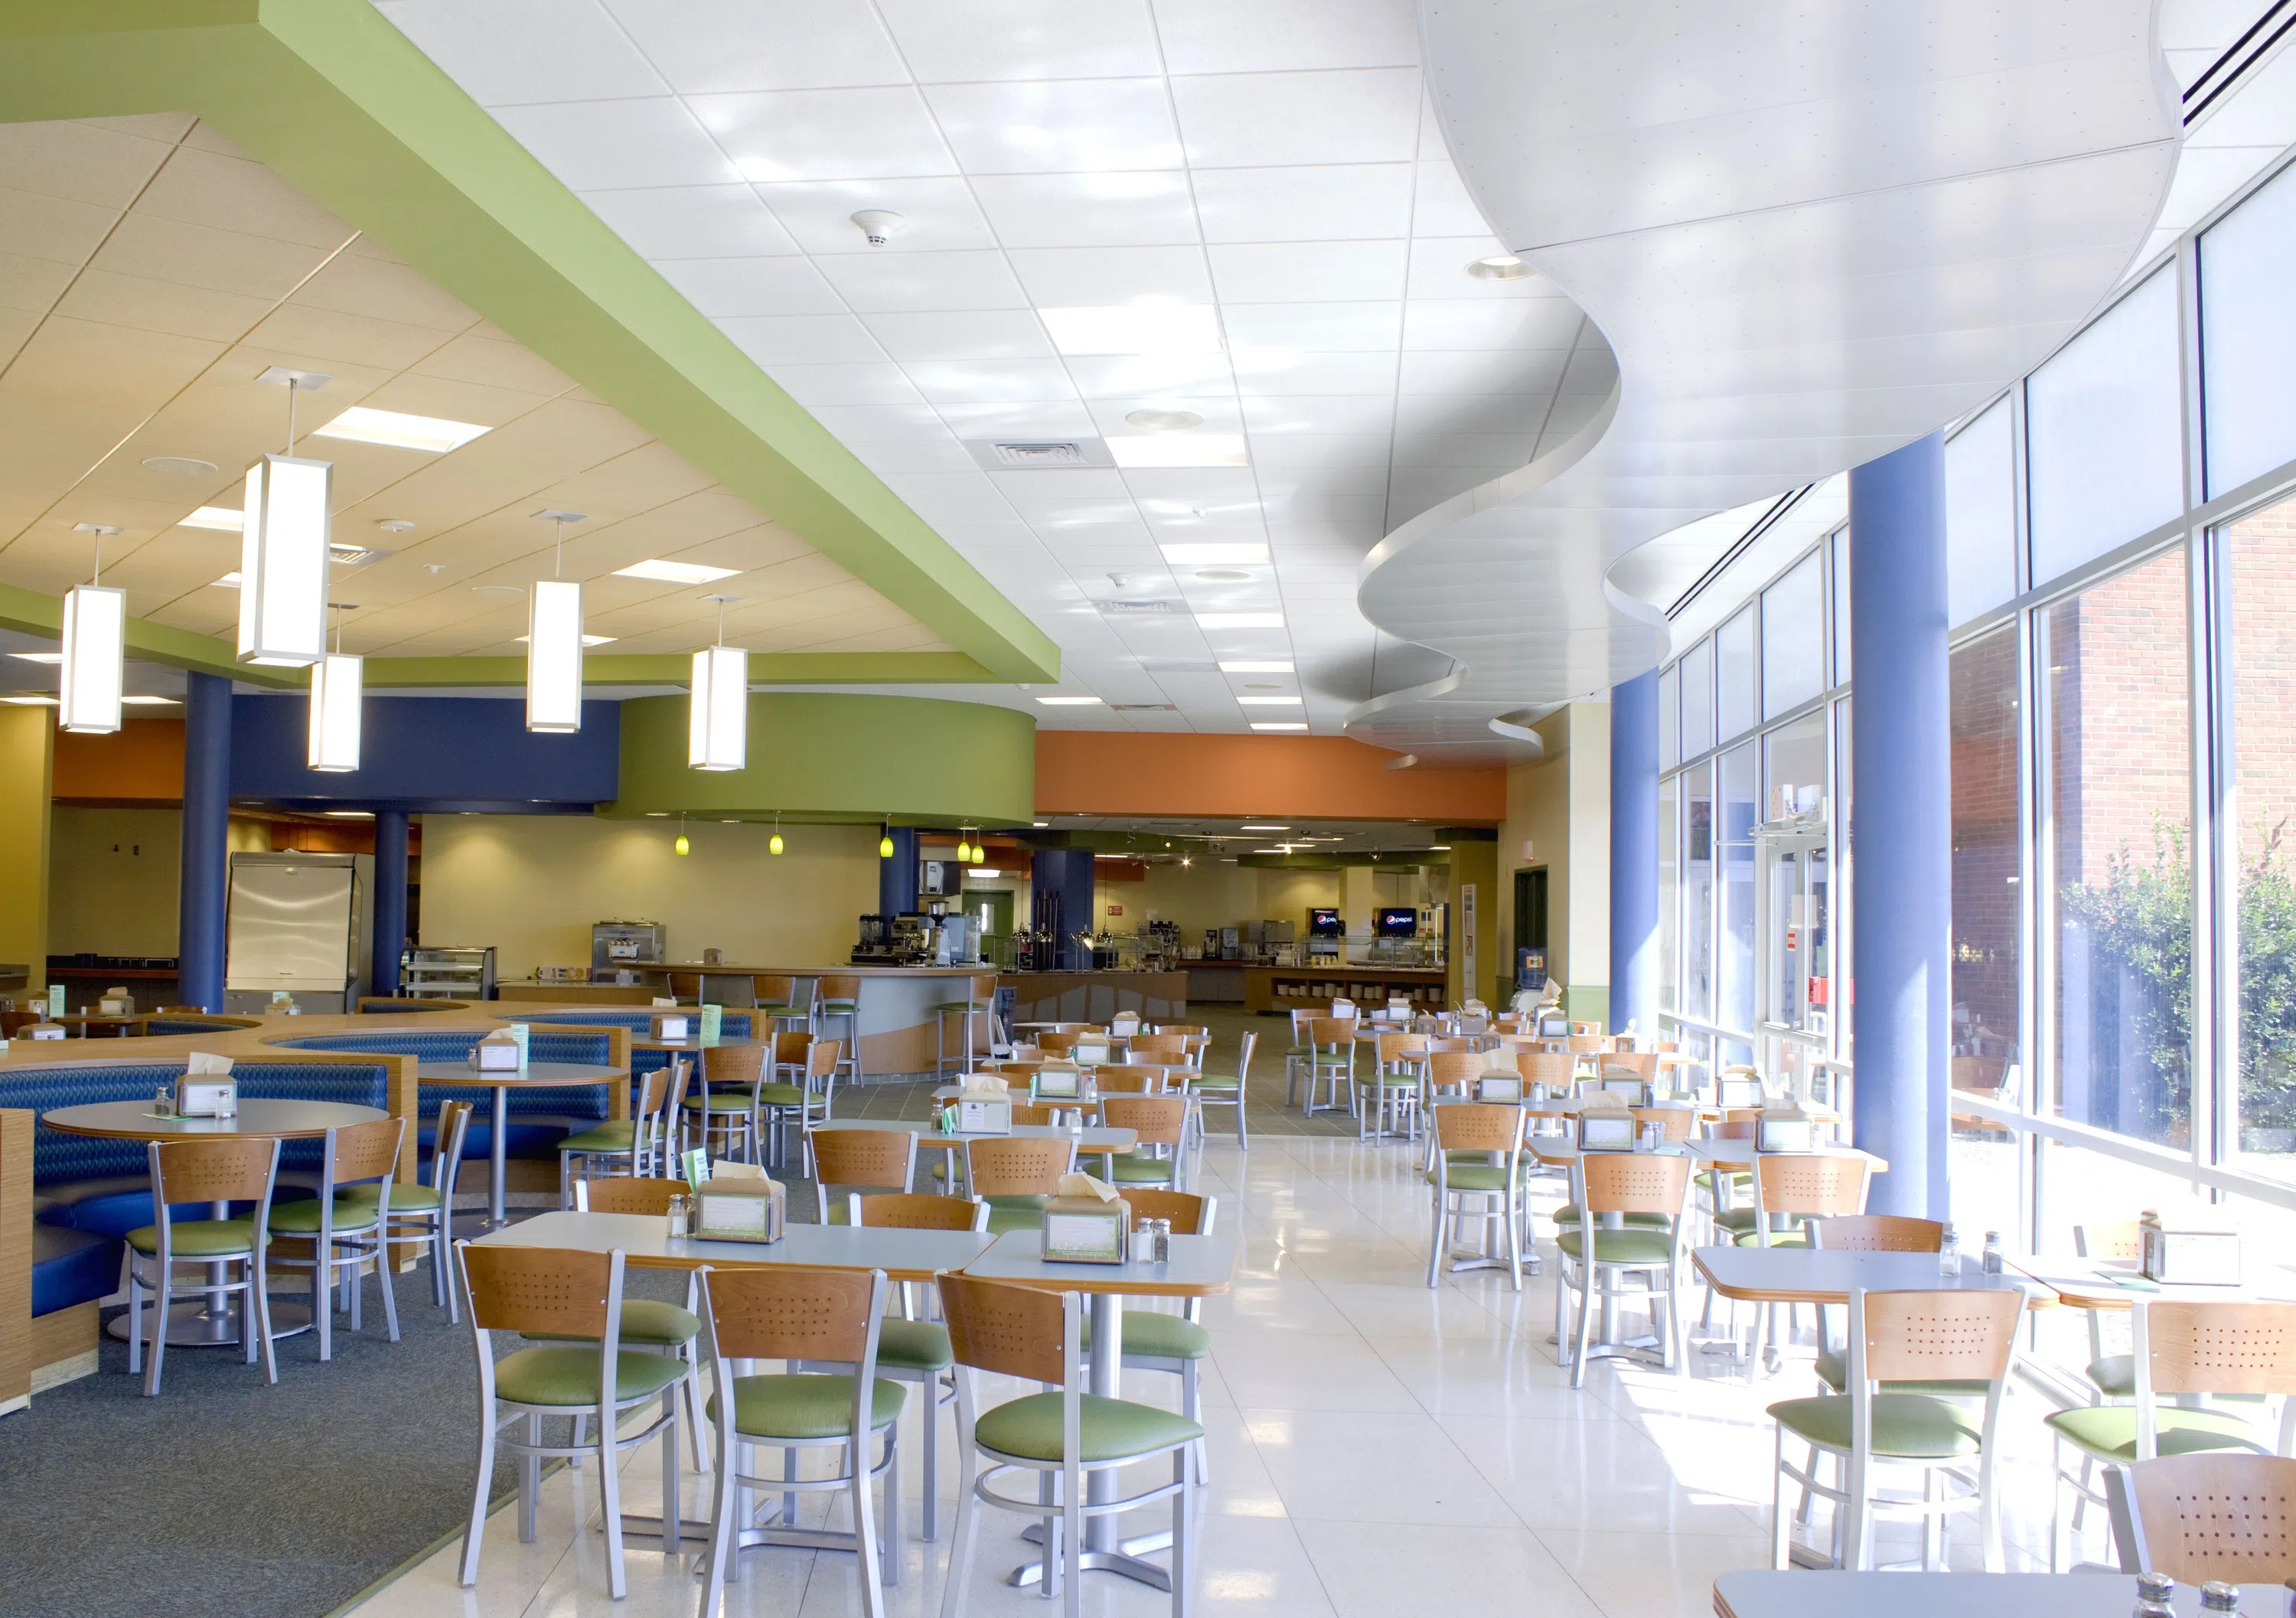 Interior view of tables and chairs in bright dining hall space.